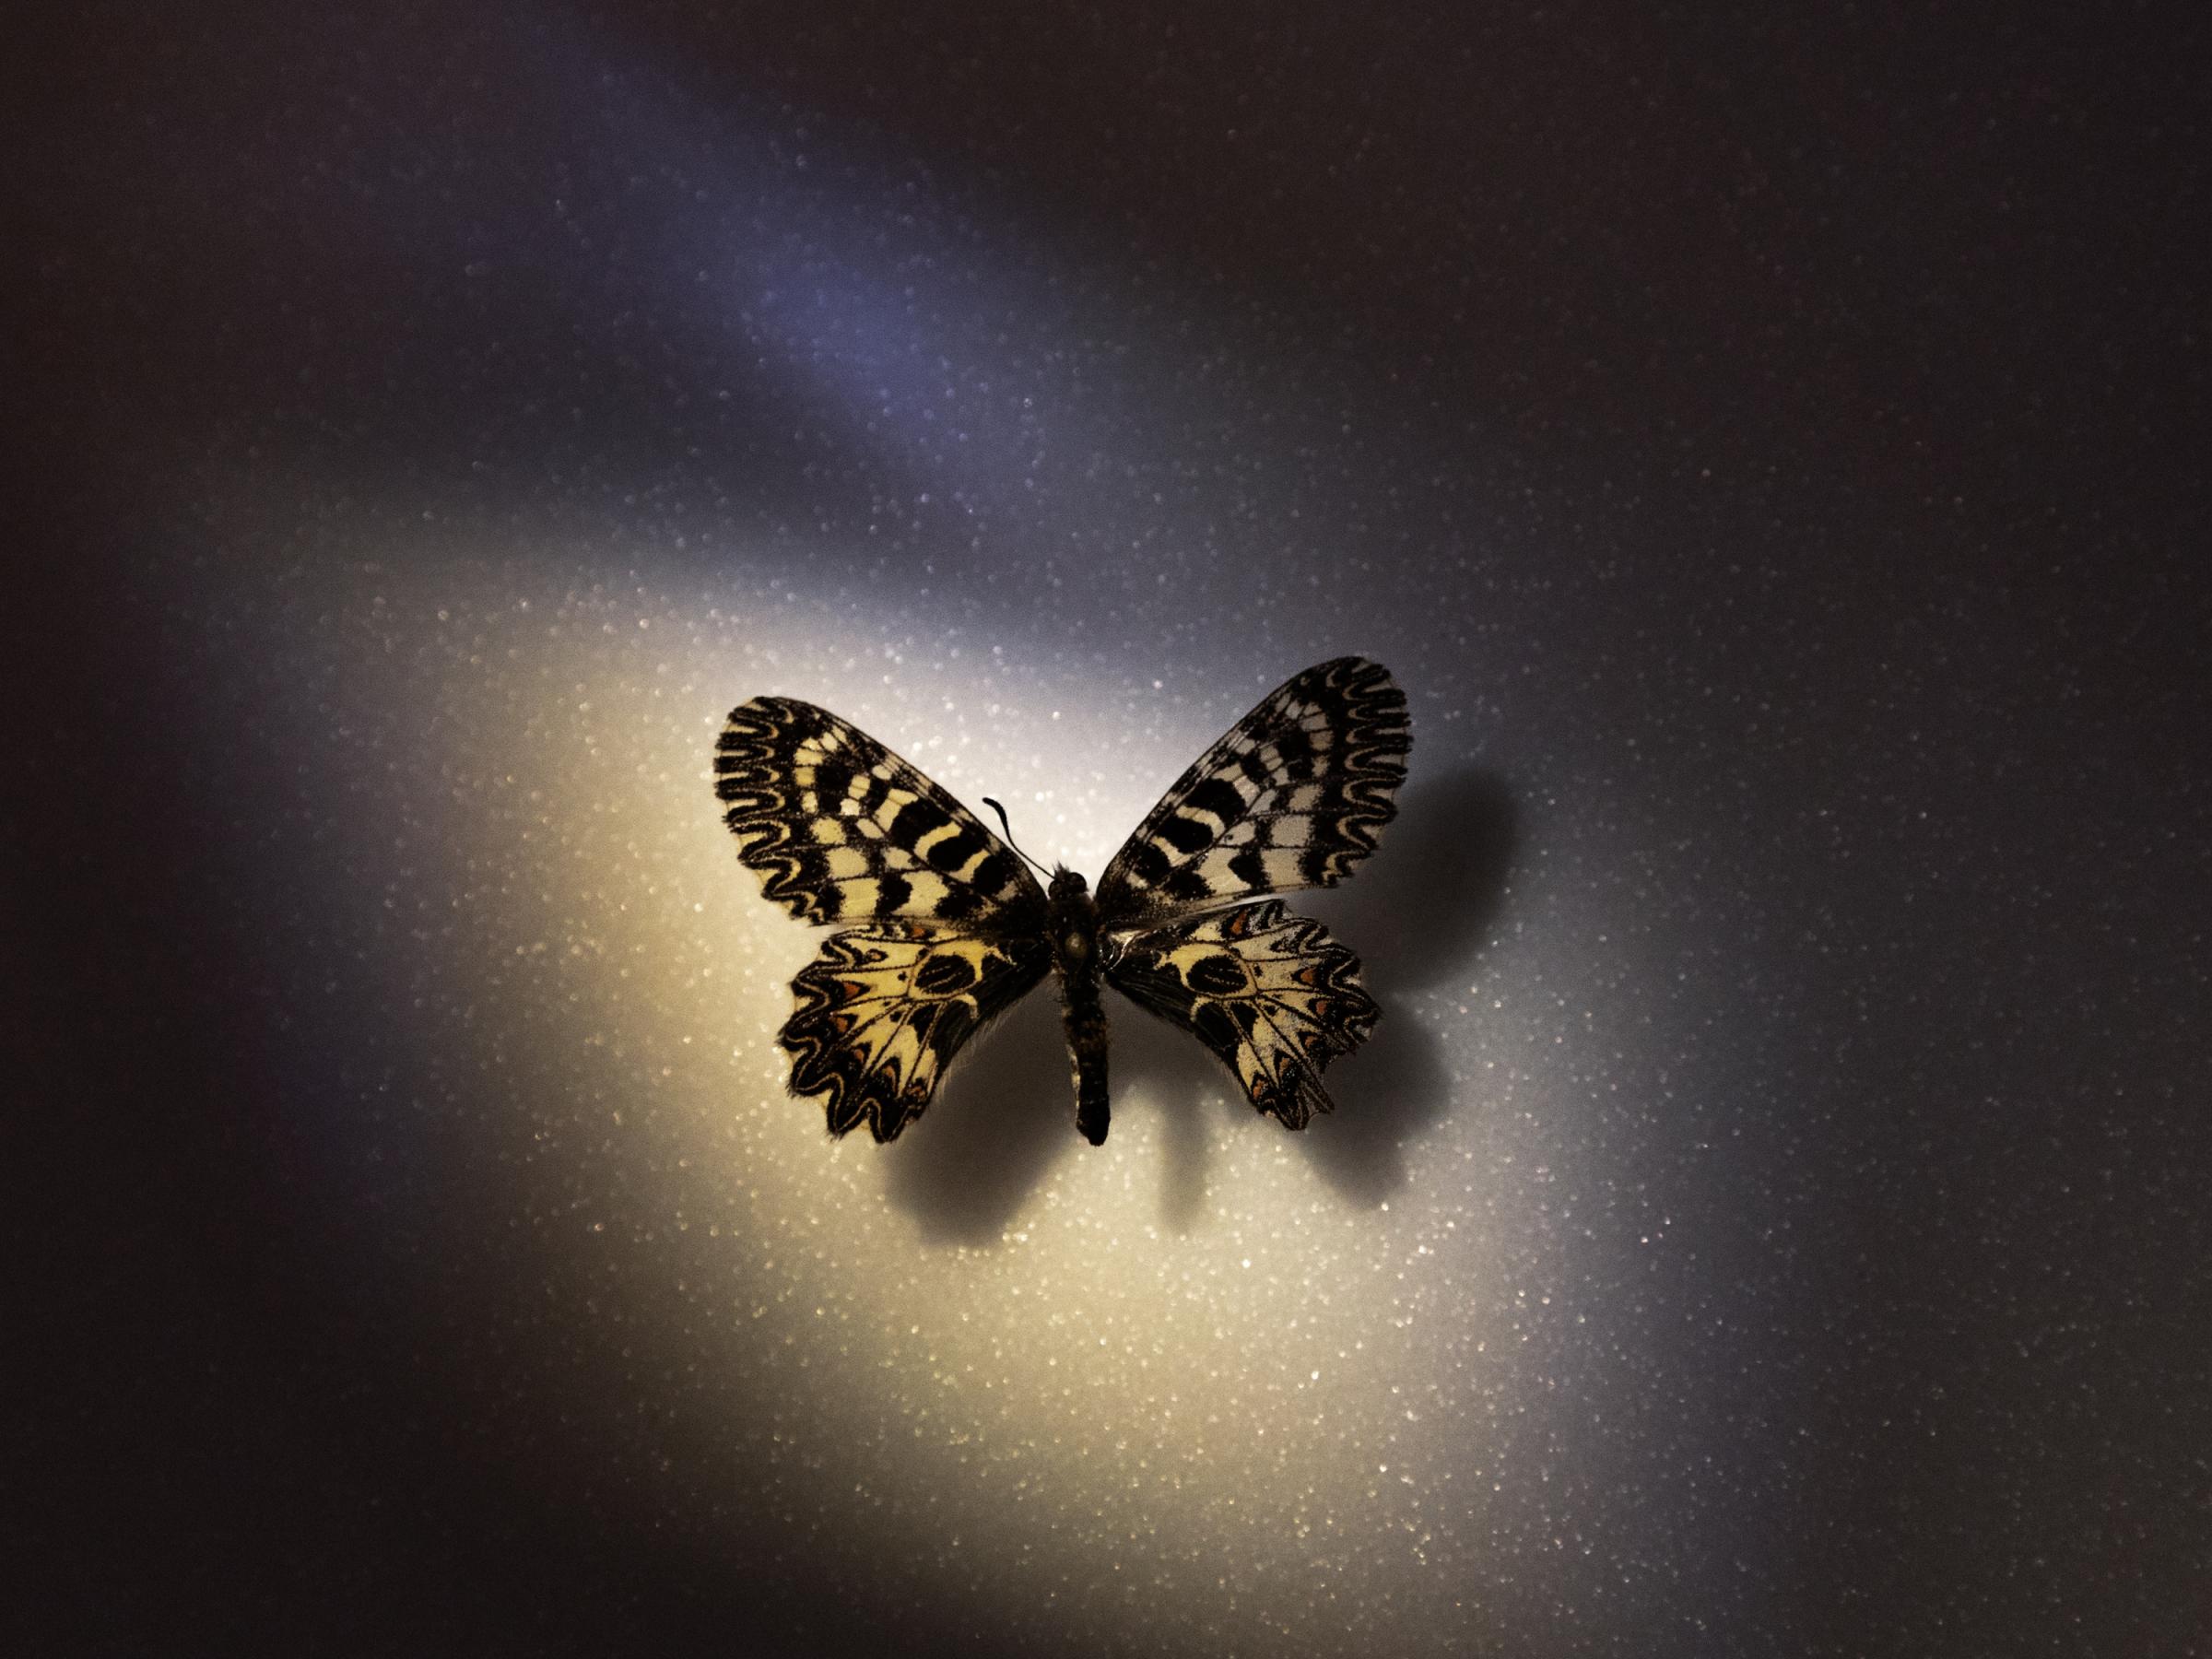 We are still dreaming - on going - A specimen of the butterfly Zerynthia polyxena Geyer,...